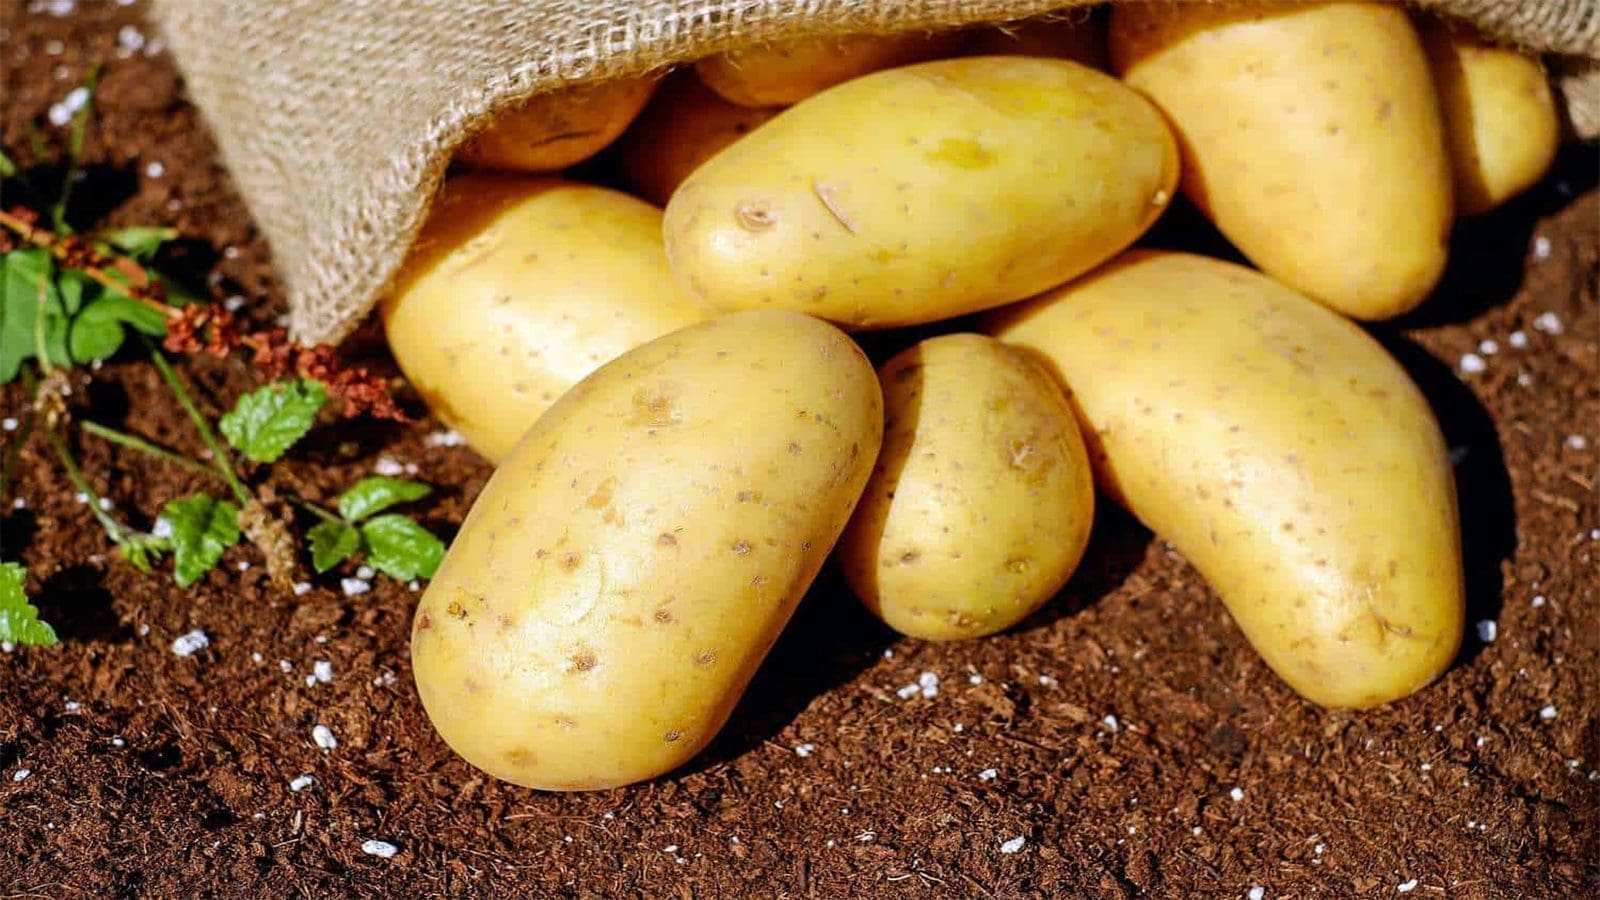 Corteva launches new generation fungicide for potatoes